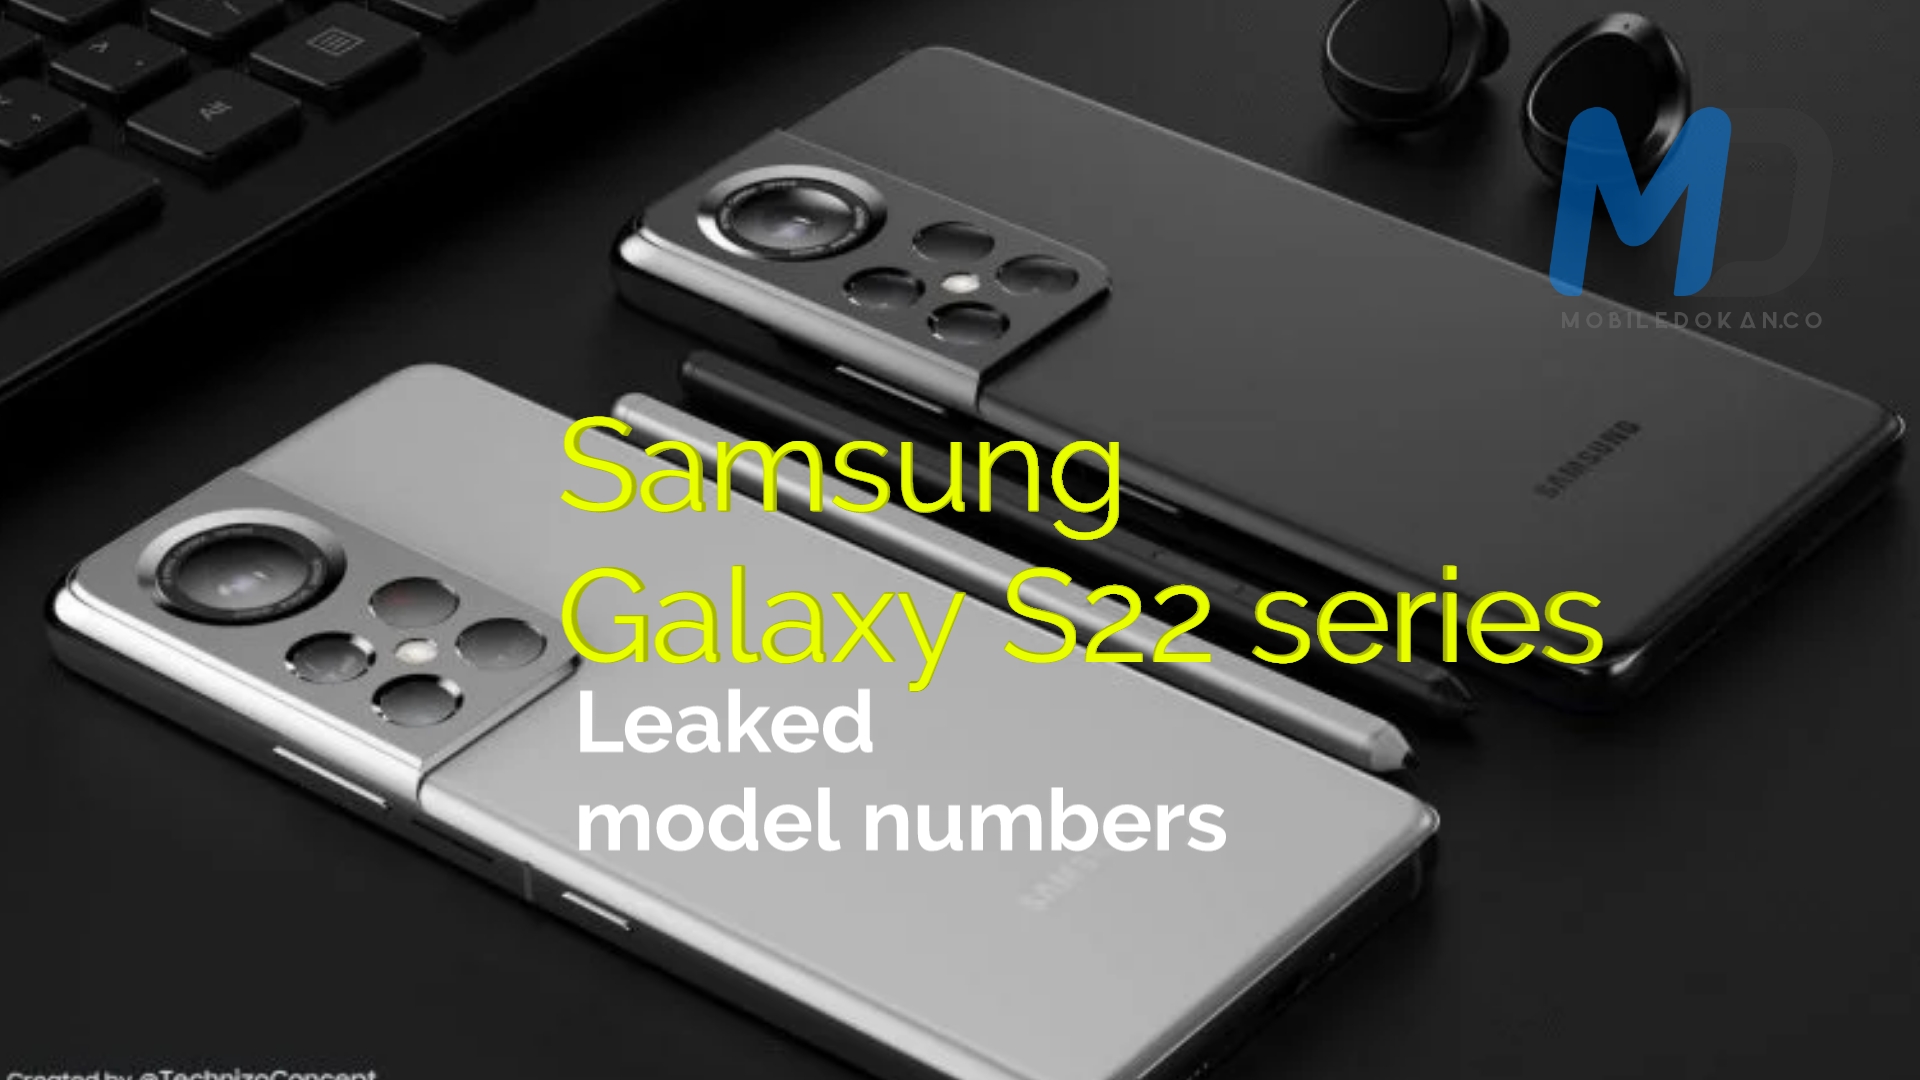 Samsung Galaxy S22 series leaked with the model numbers